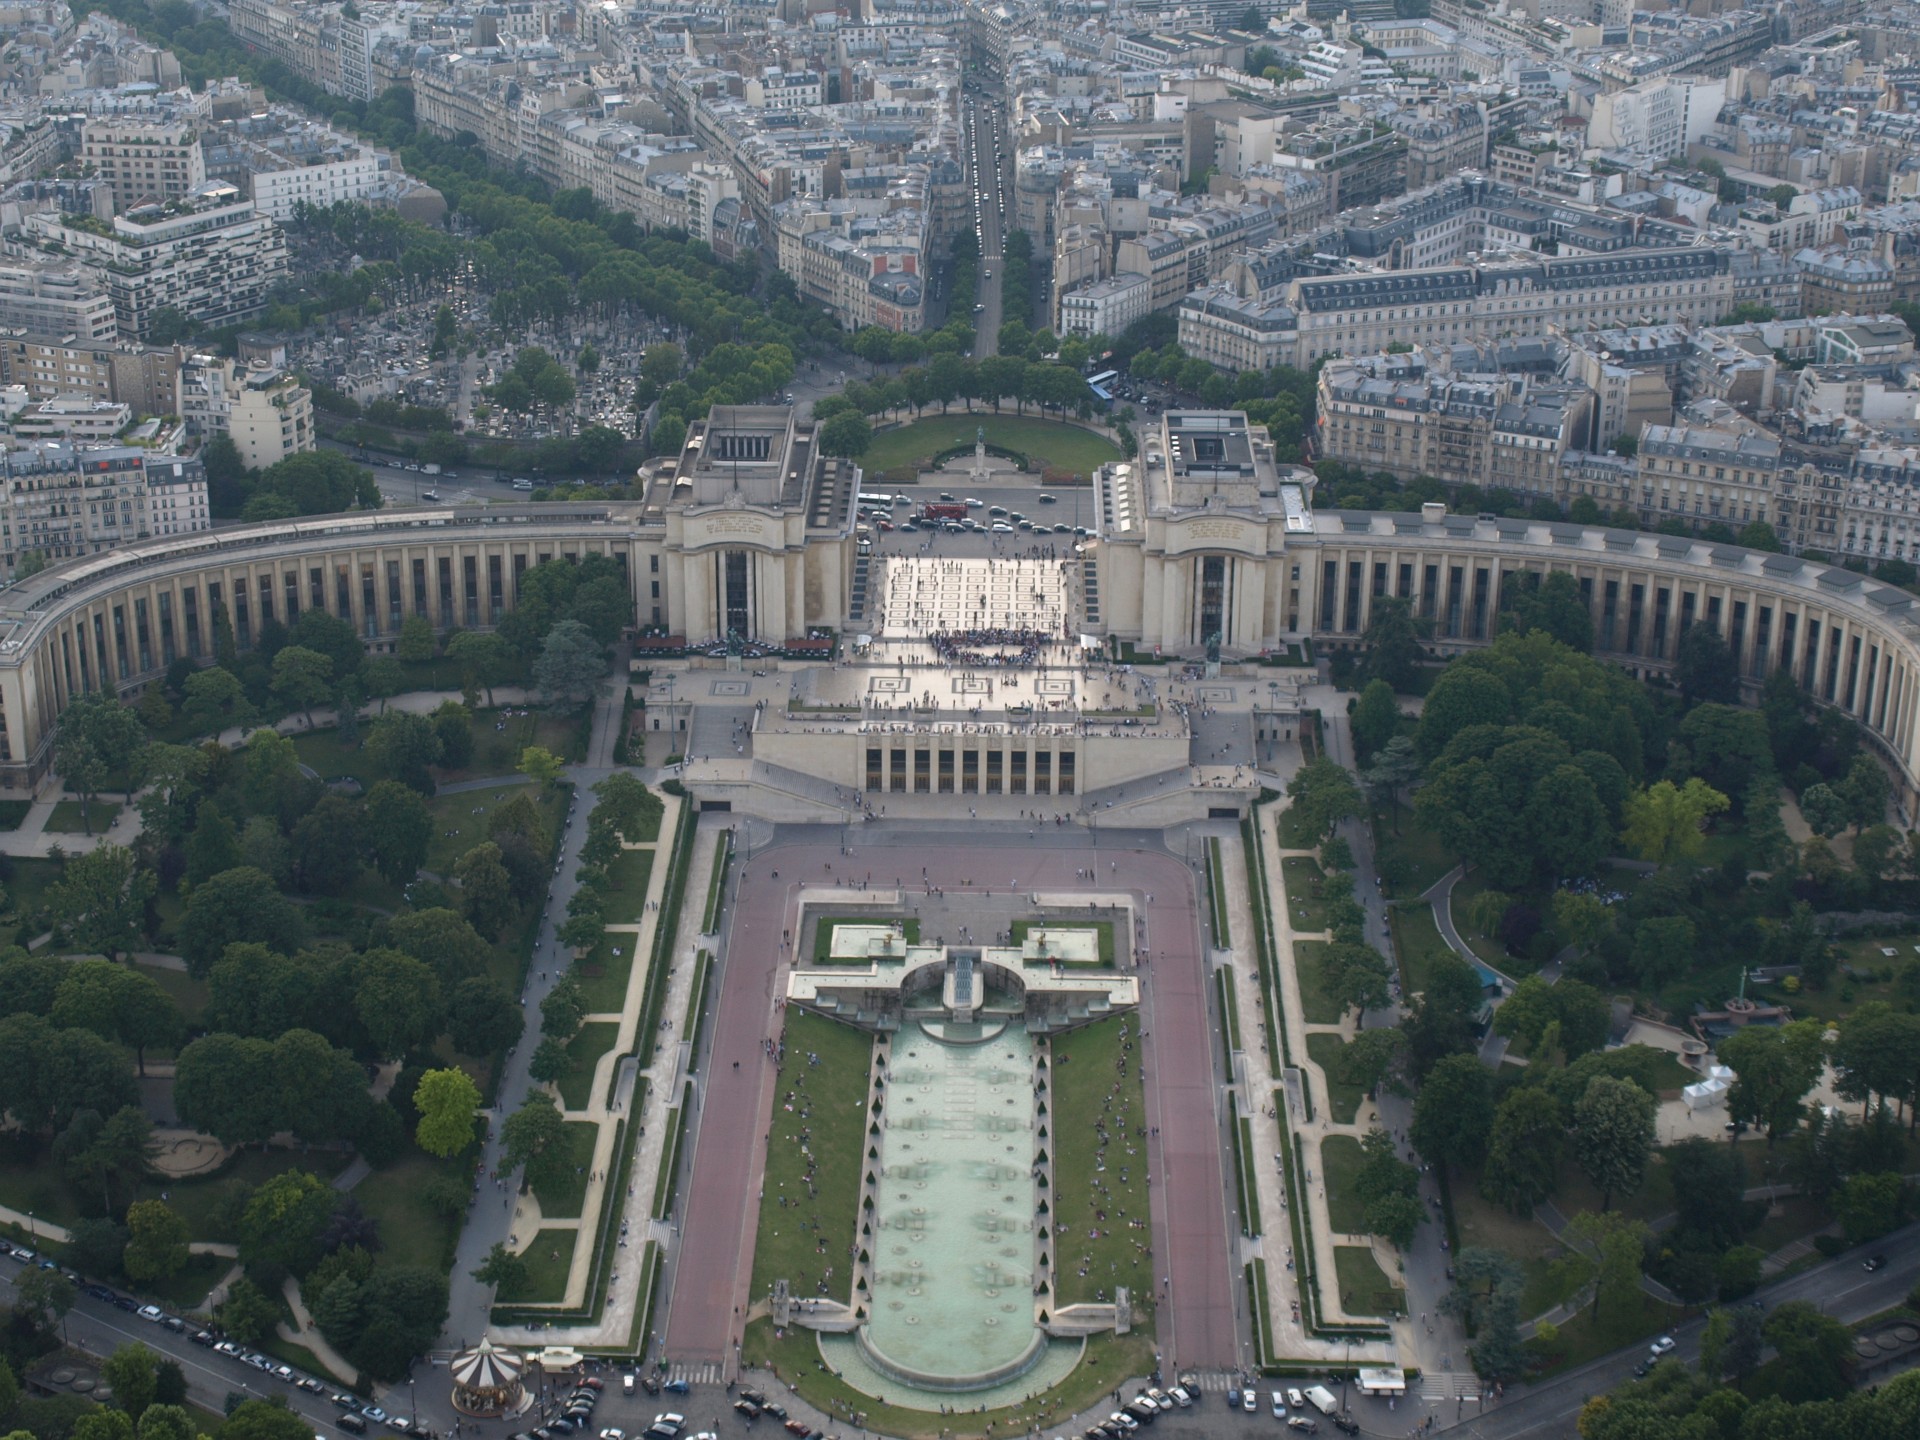 Palais de Chaillot From the Third Floor of the Tower